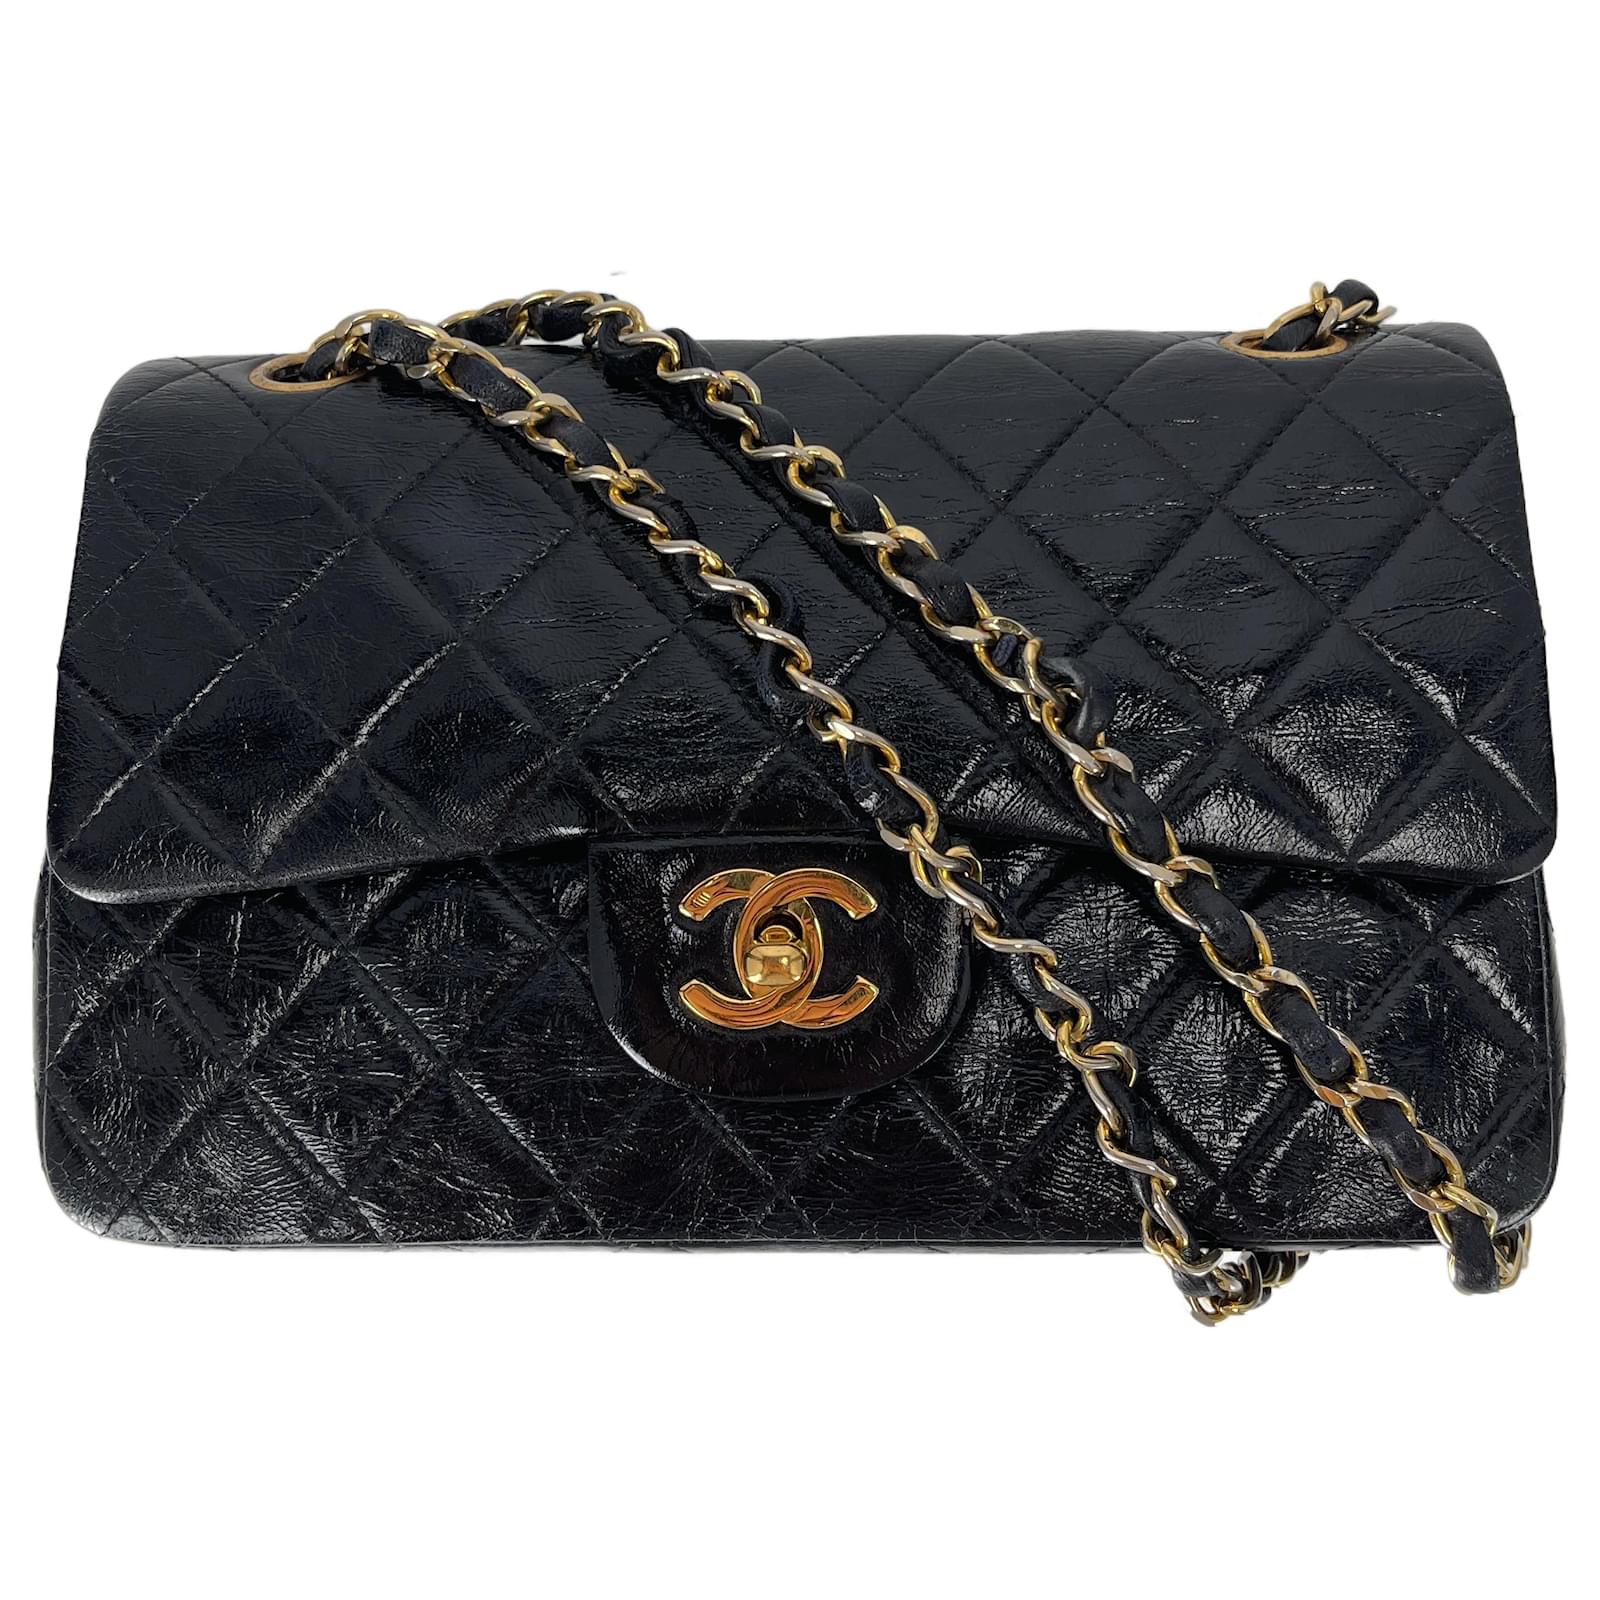 CHANEL Pre-Owned 1986 /1986 Small Classic Double Flap Shoulder Bag